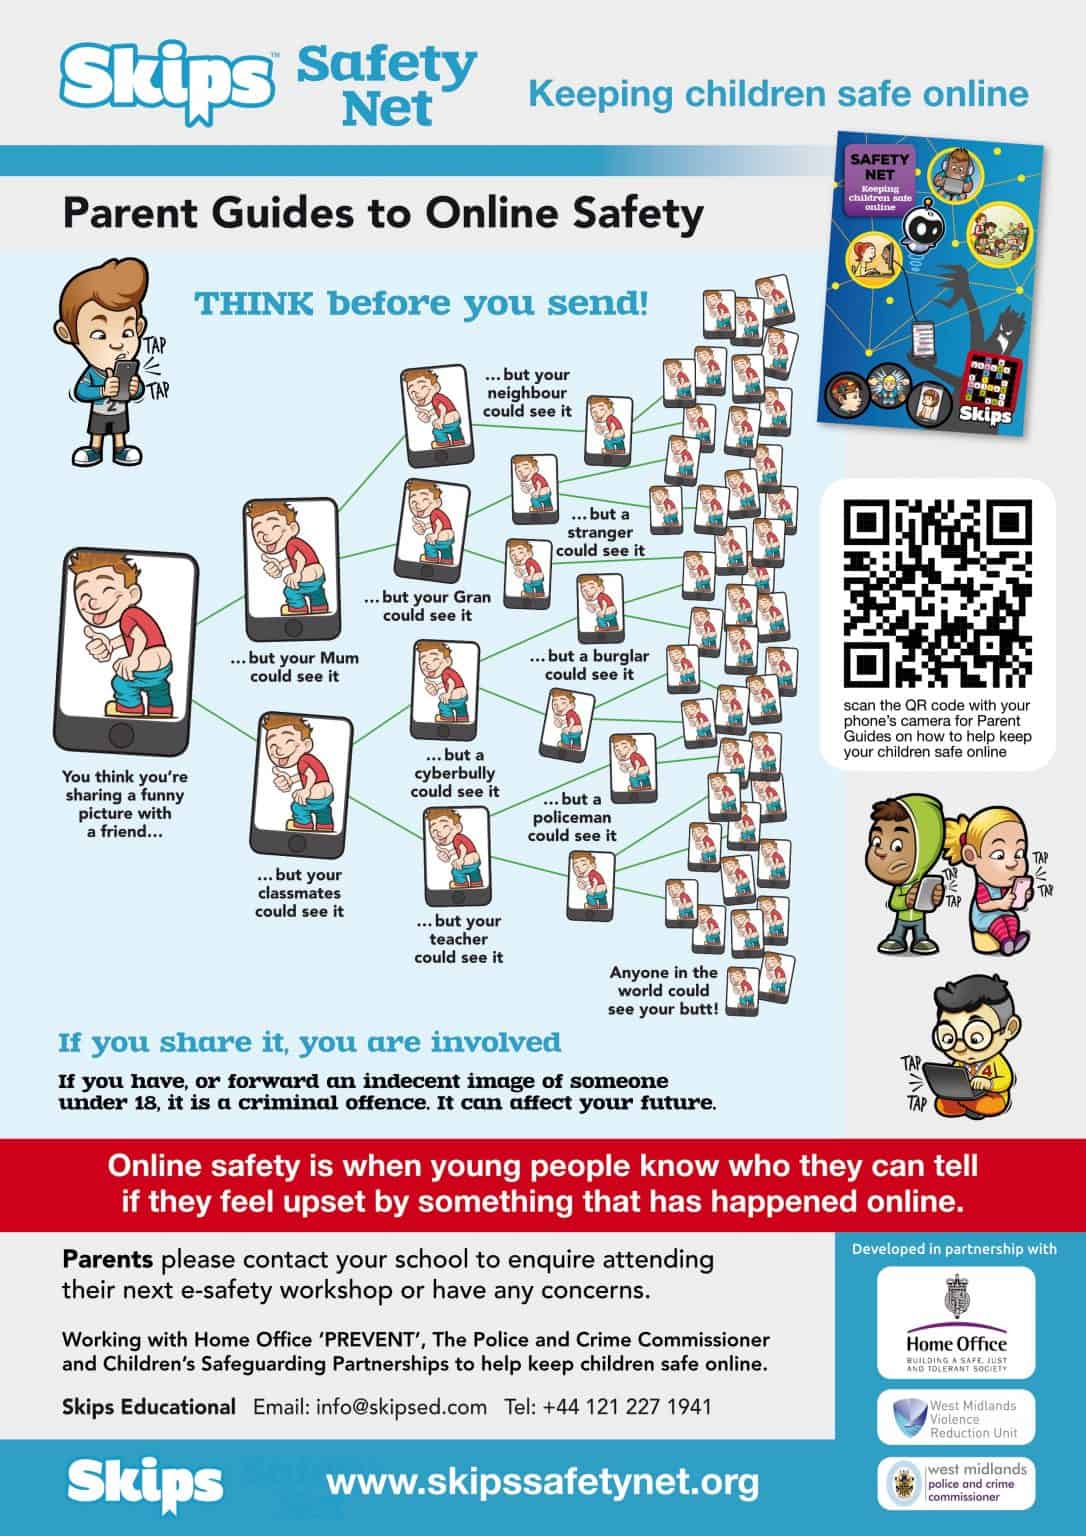 Foster carer parent guide to online safety think before sharing inappropriate images online